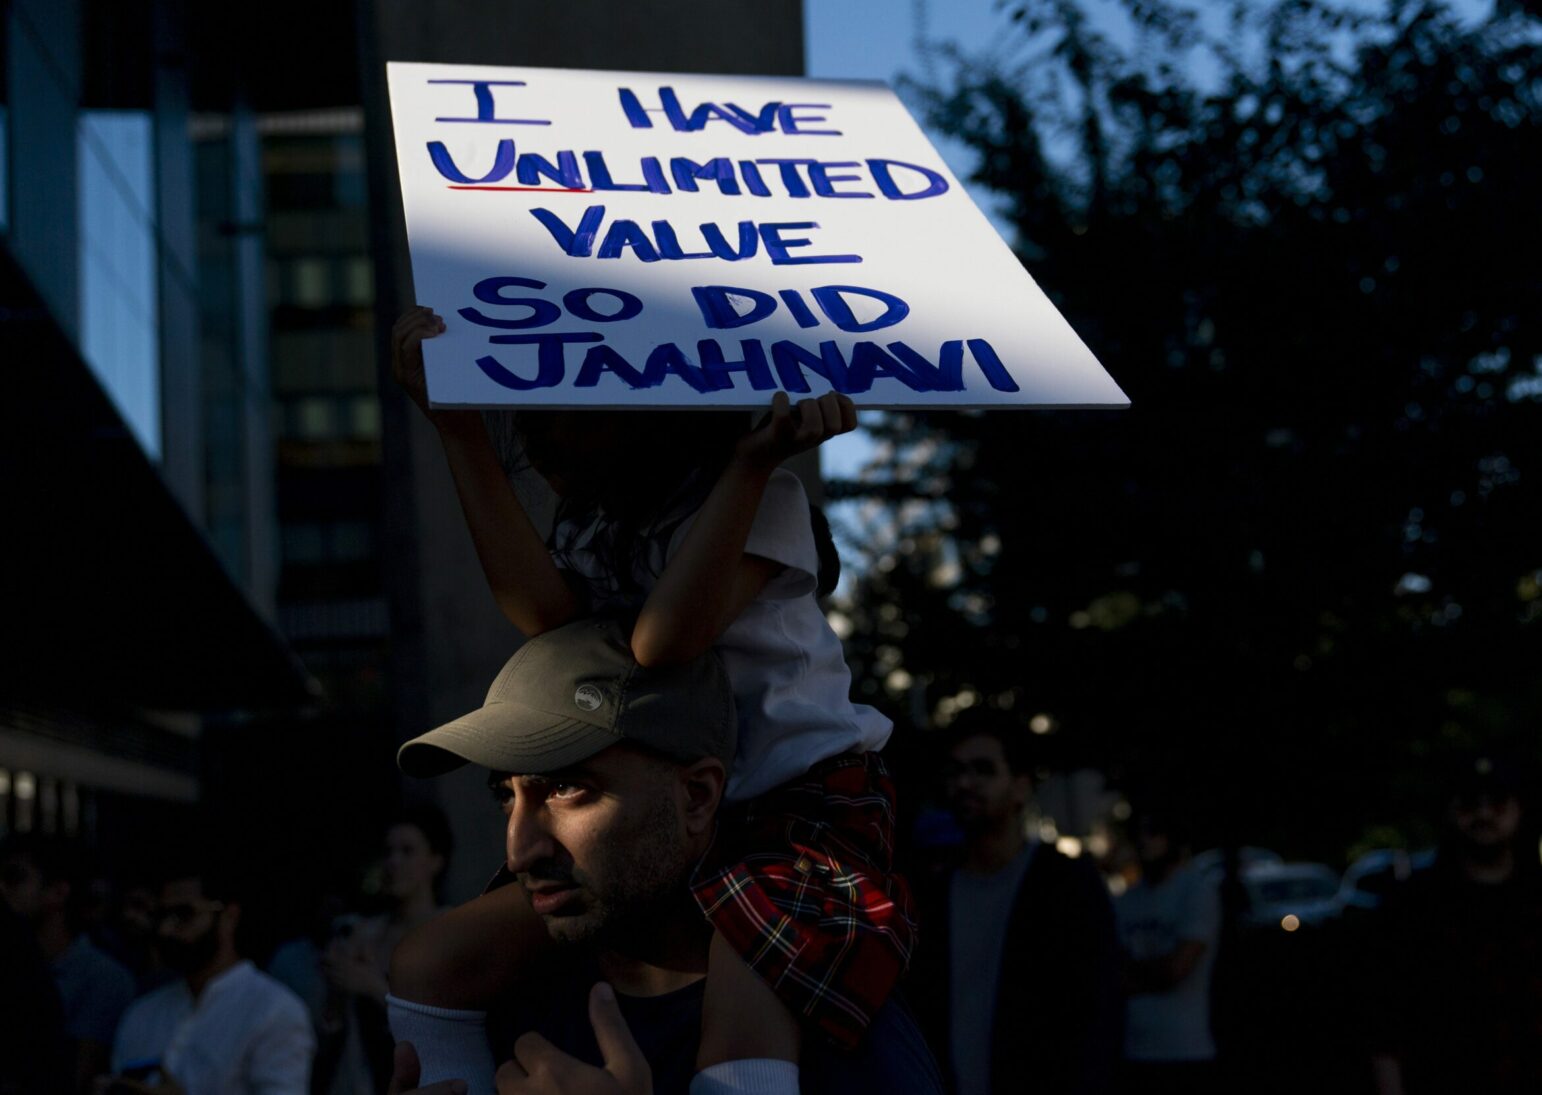 A five-year-old girl sits atop her father's shoulders holding a sign that reads, "I have unlimited value. So did Jahhnavi." They are partly in shadow and light at a protest.